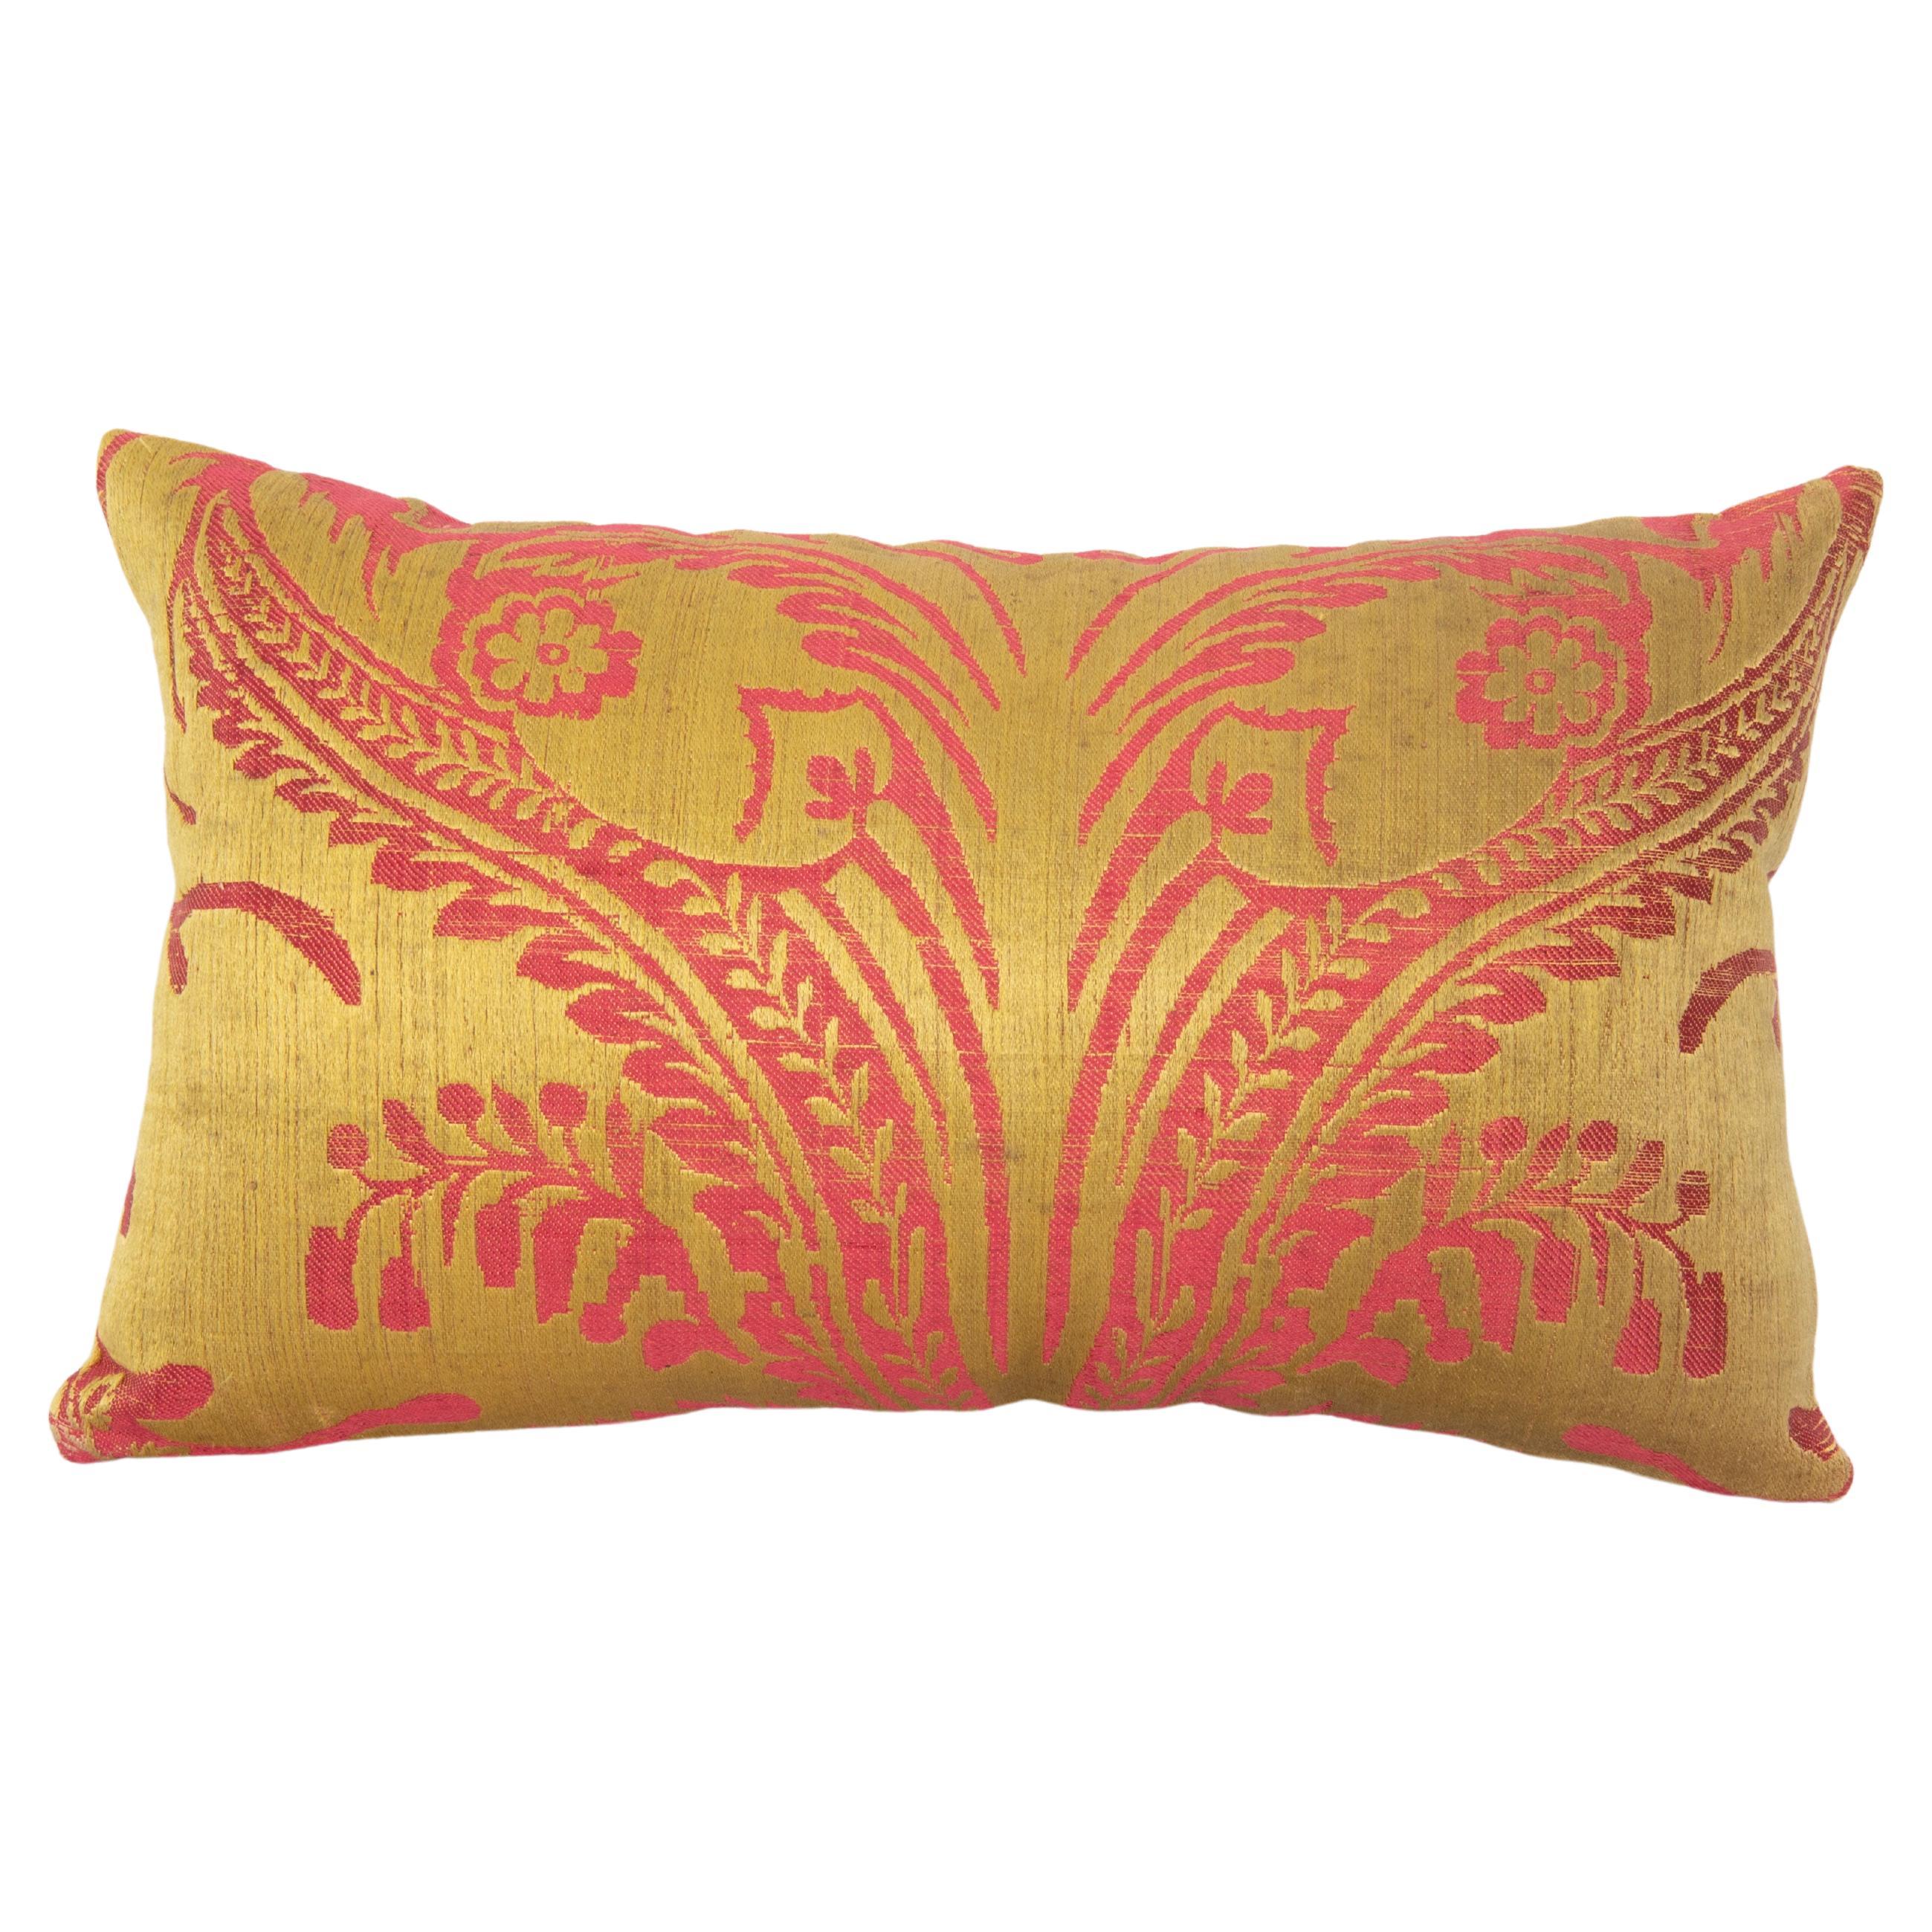 Kidney Pillow Case Made from an Antique Italian Textile For Sale